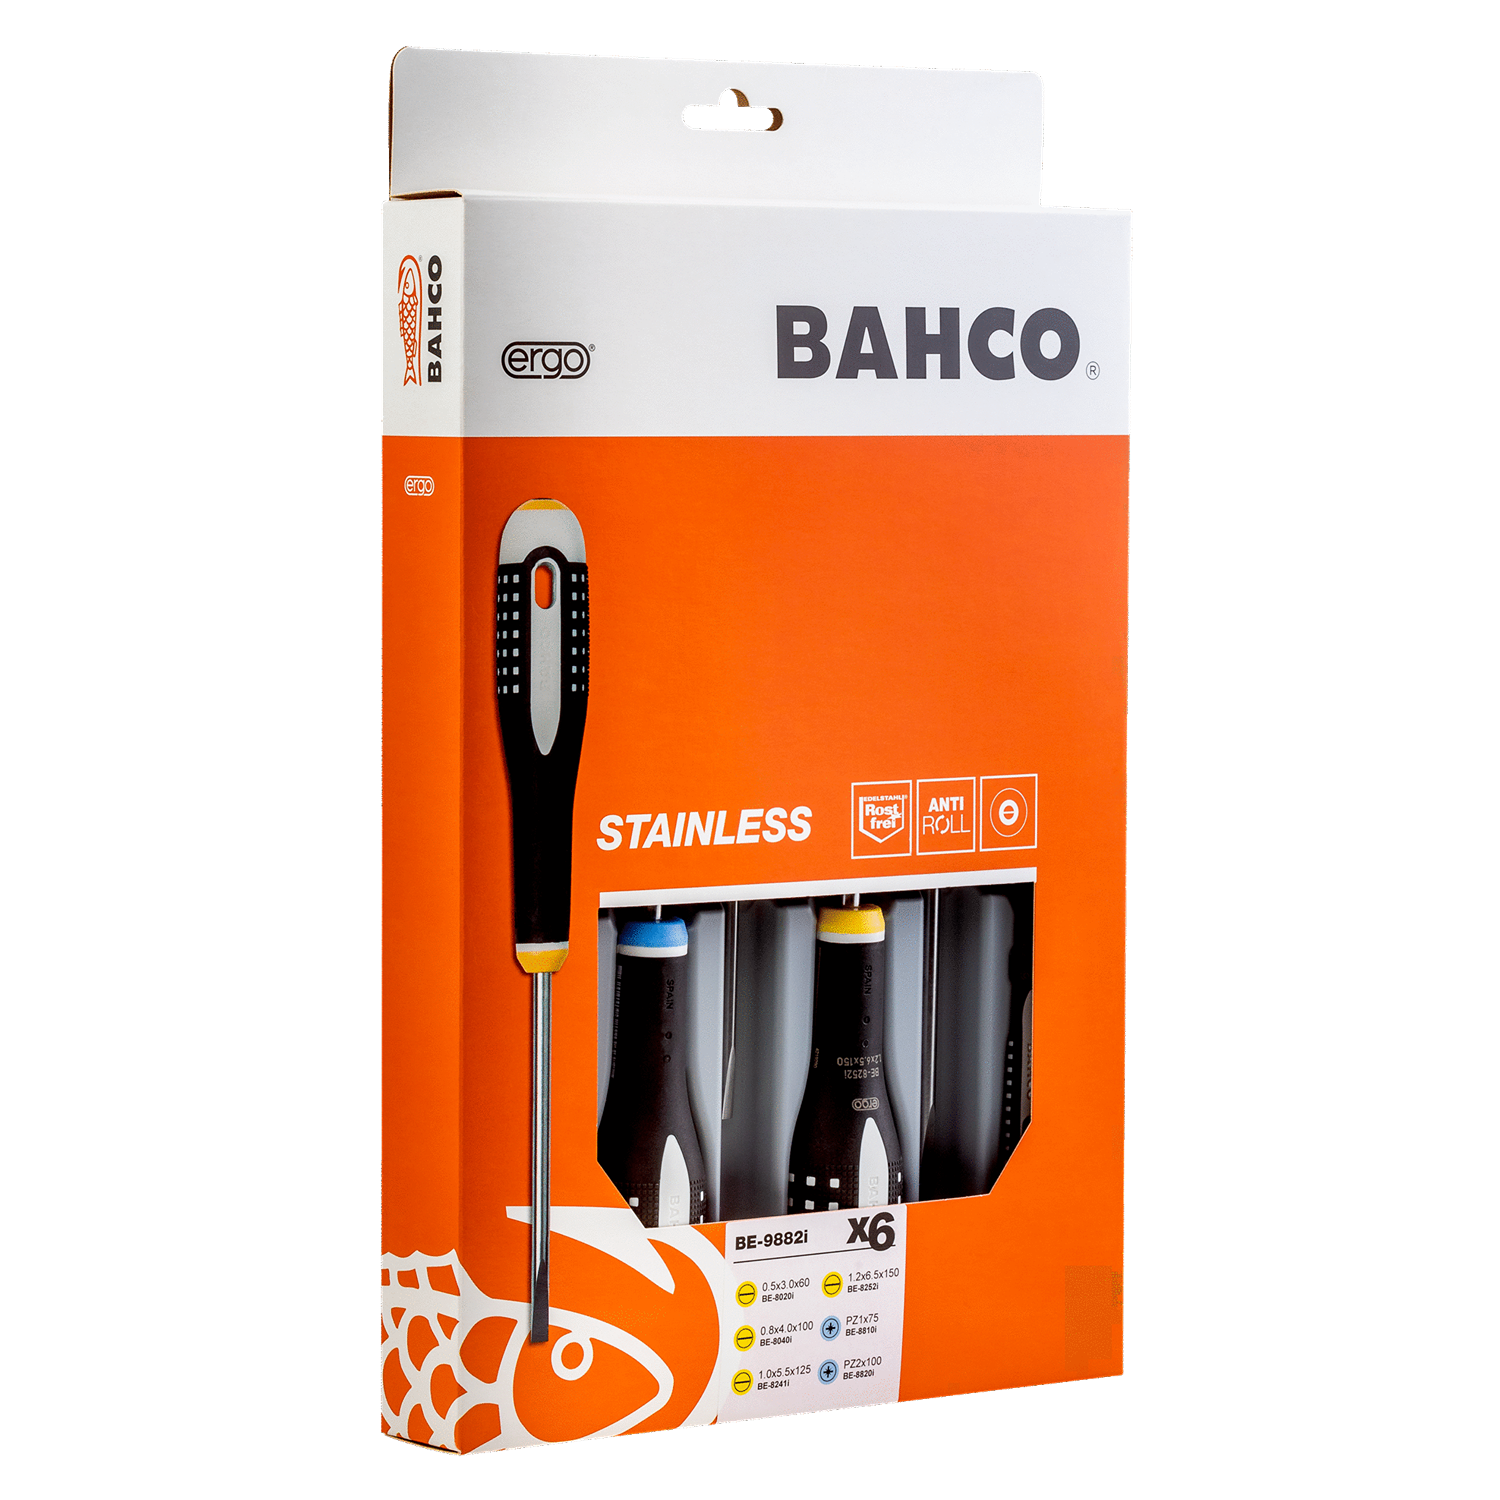 BAHCO BE-9882i Slotted/Pozidriv Screwdriver Set - 6 Pcs - Premium Screwdriver Set from BAHCO - Shop now at Yew Aik.